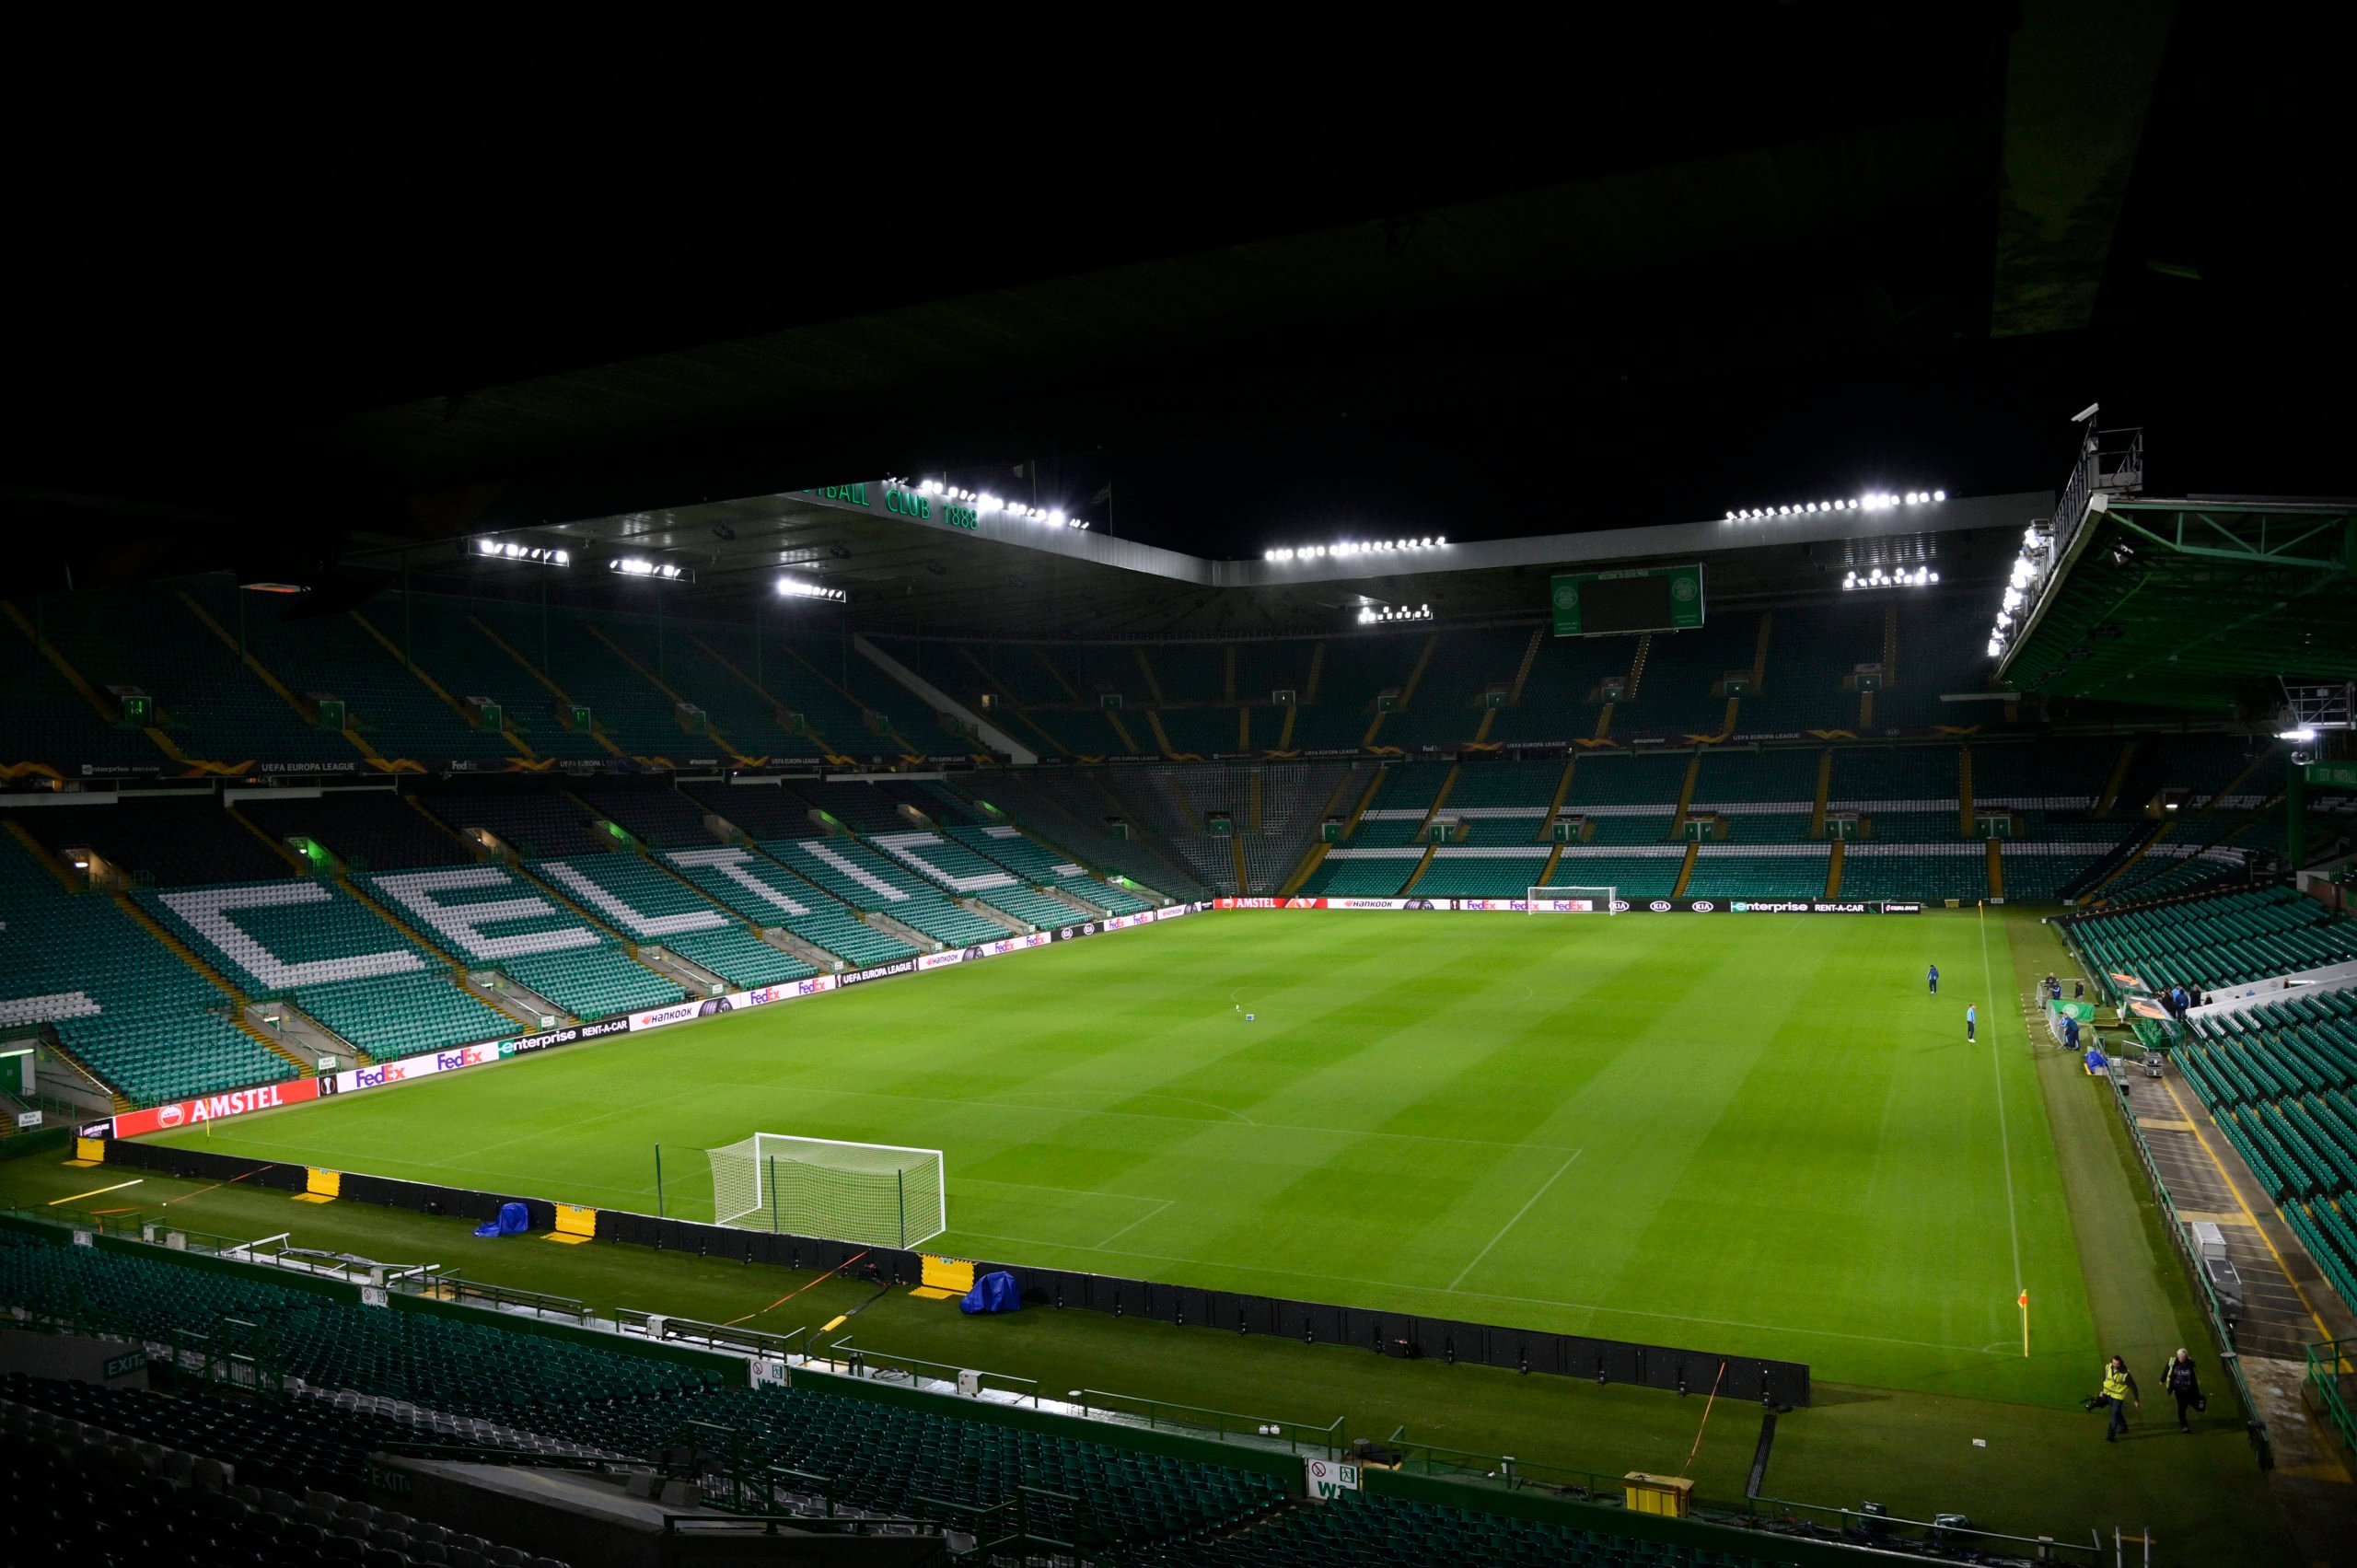 Celtic's first priority in the transfer market this summer is clear